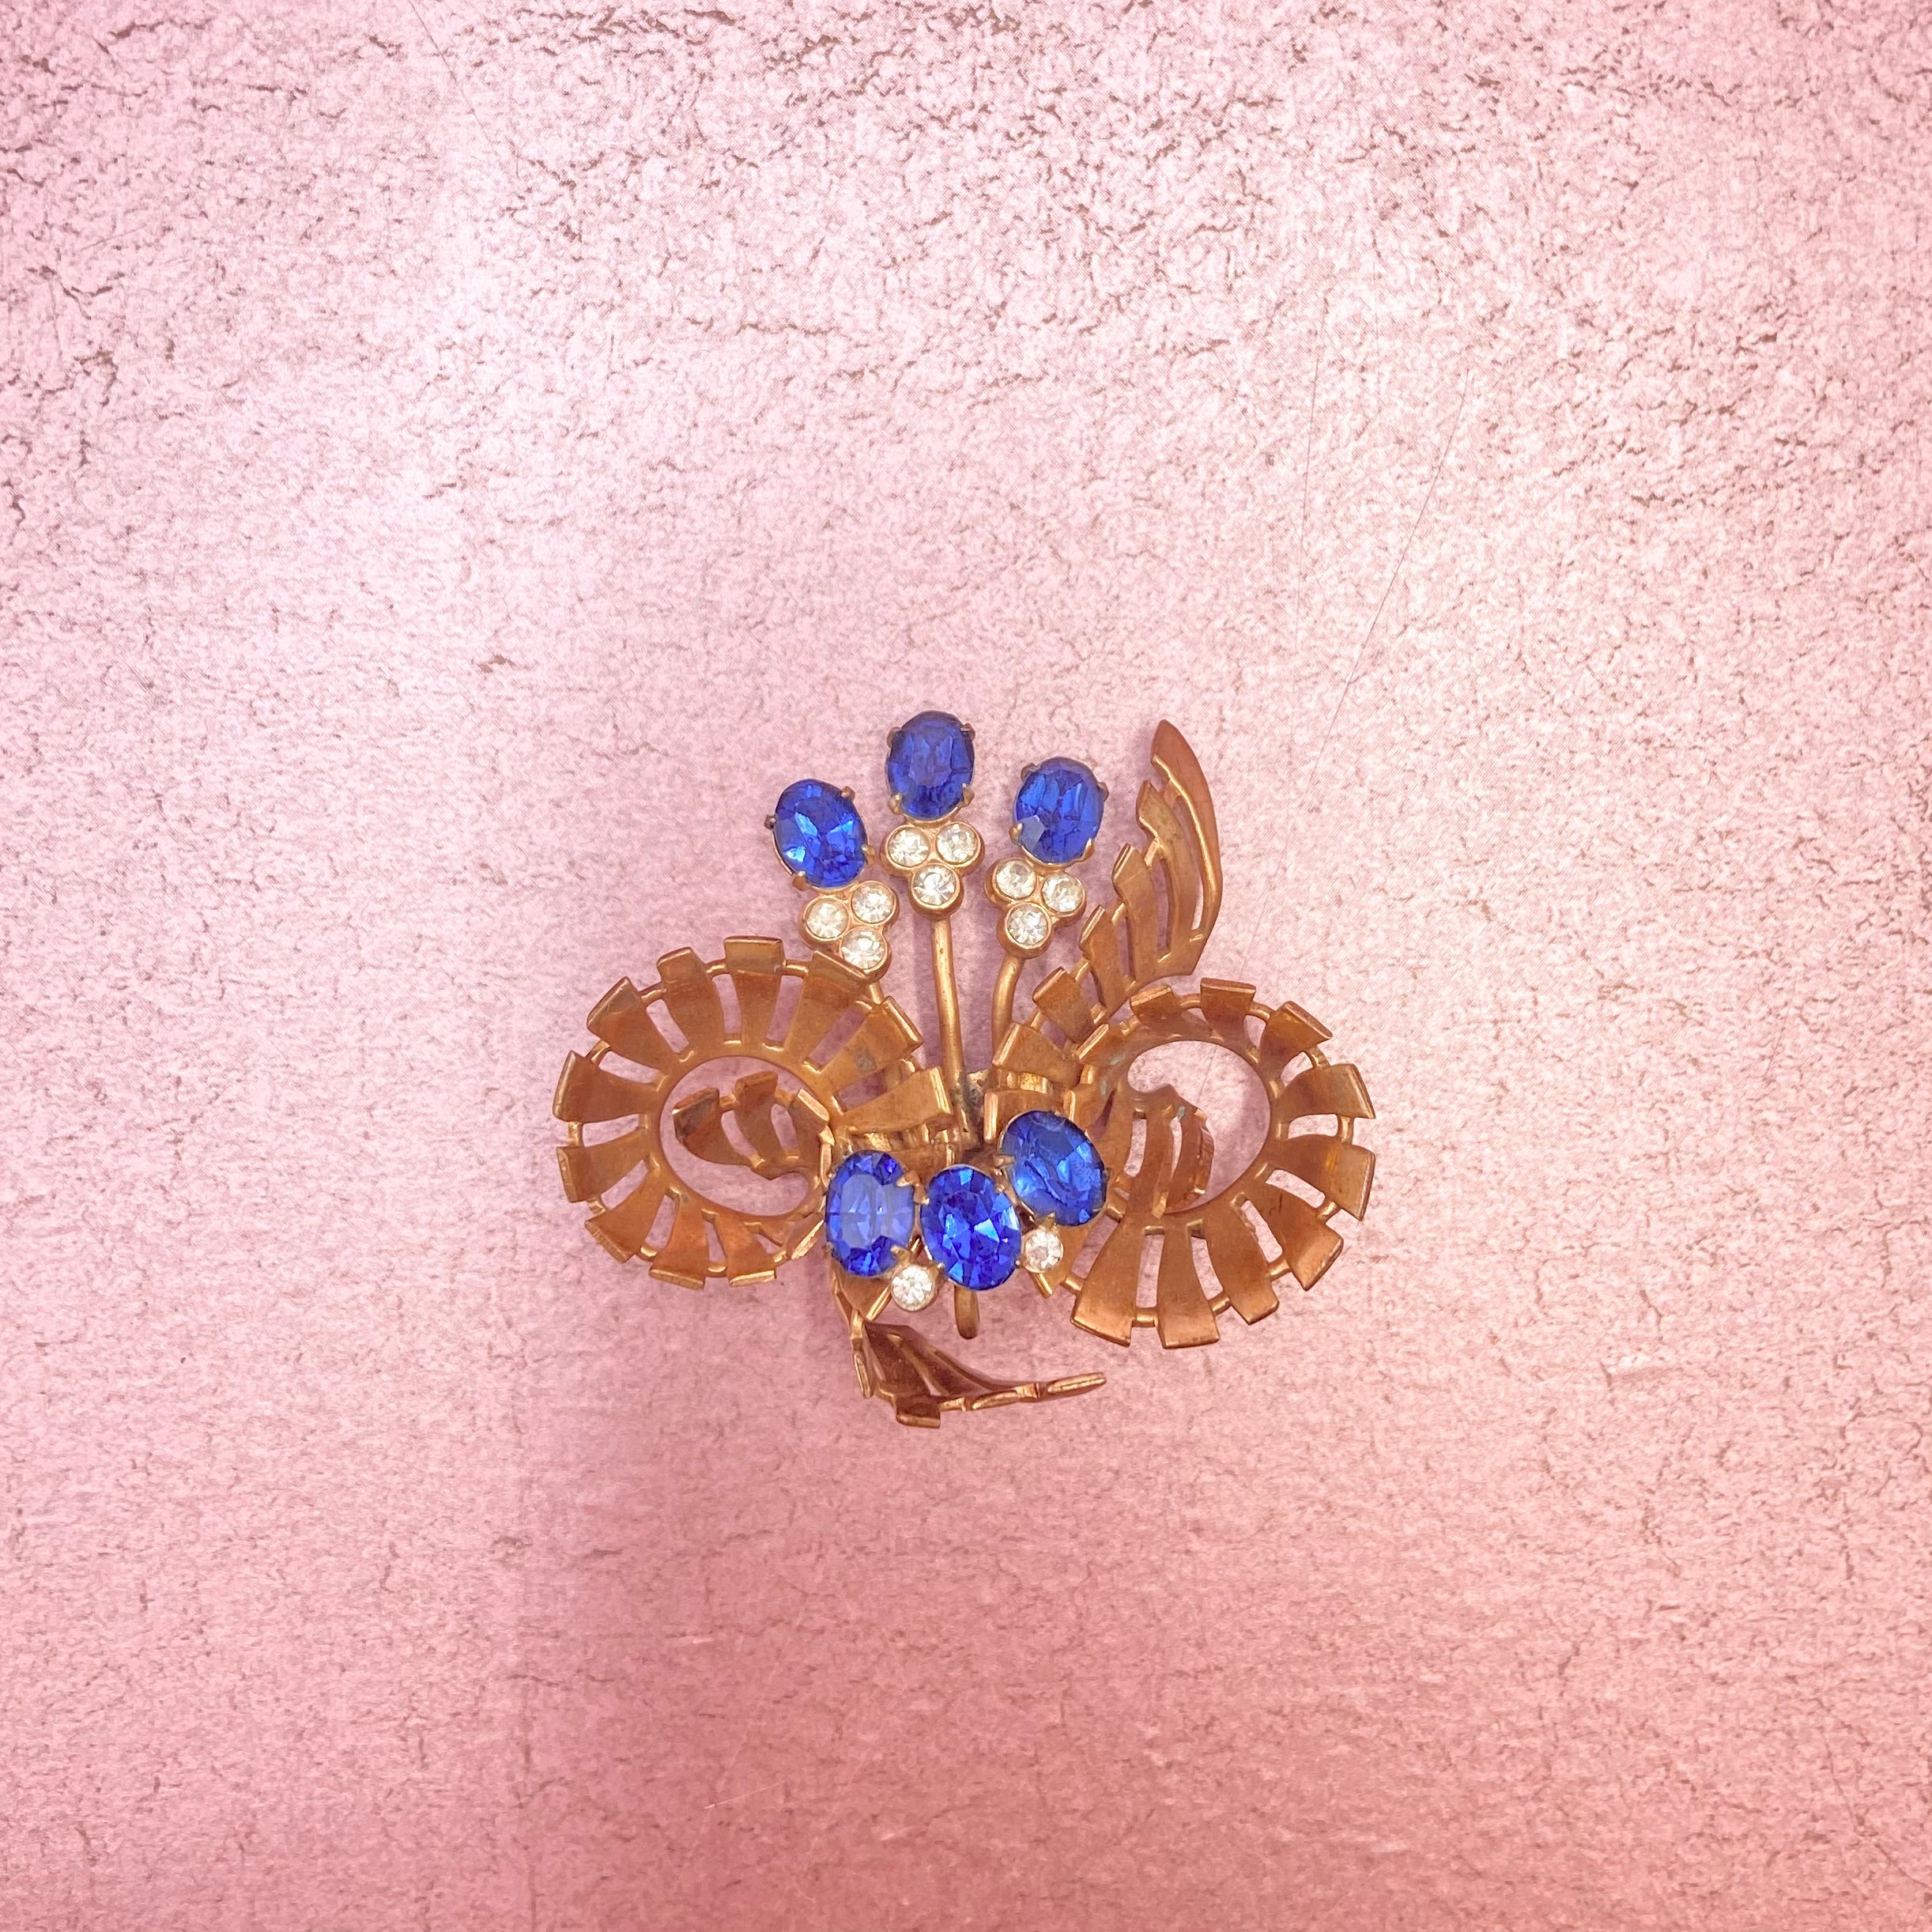 Gold Scroll Pin with Blue and White Stones